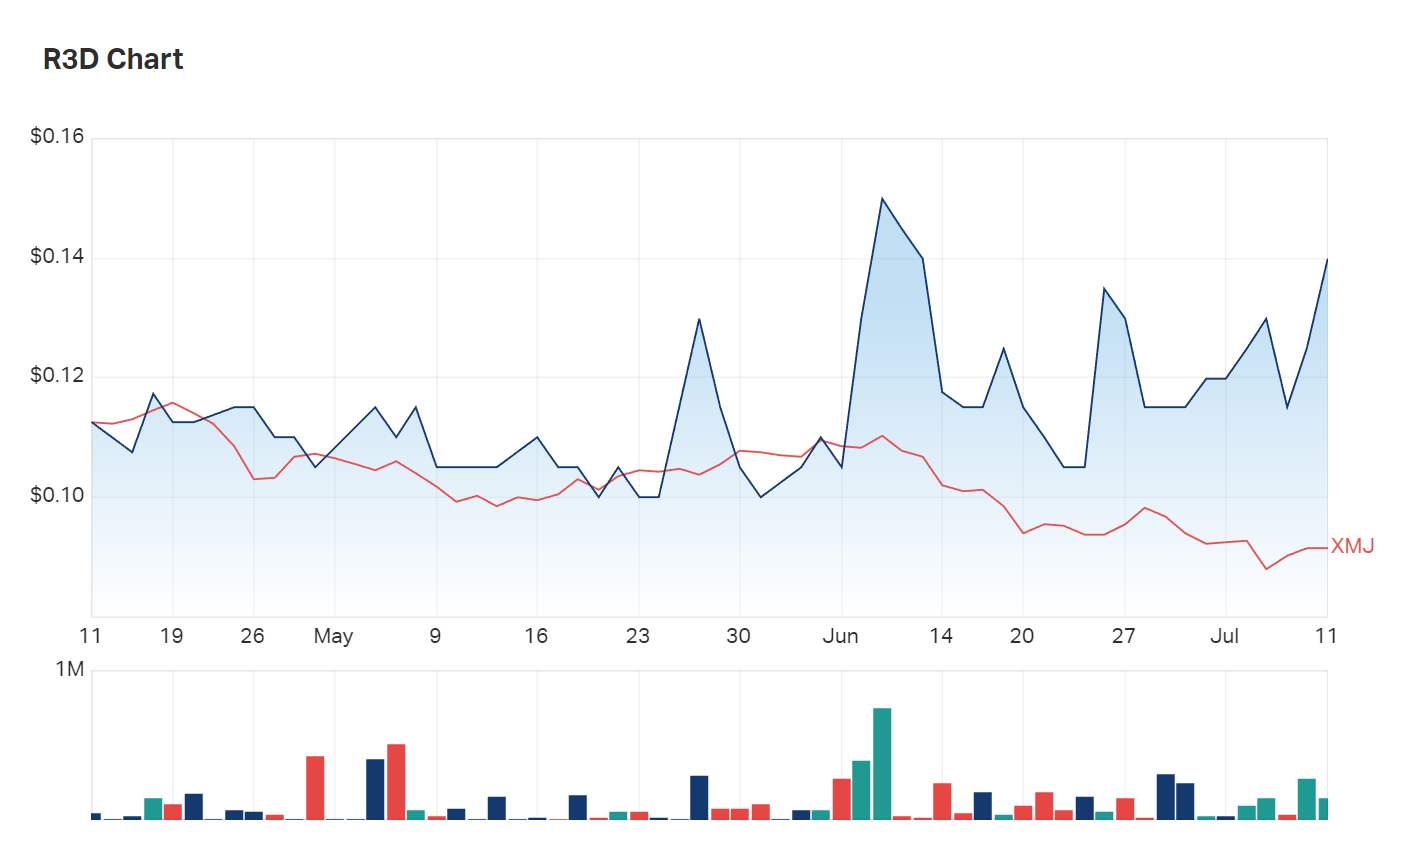 R3D's share price performance has outperformed the materials index for nearly all of the last three months